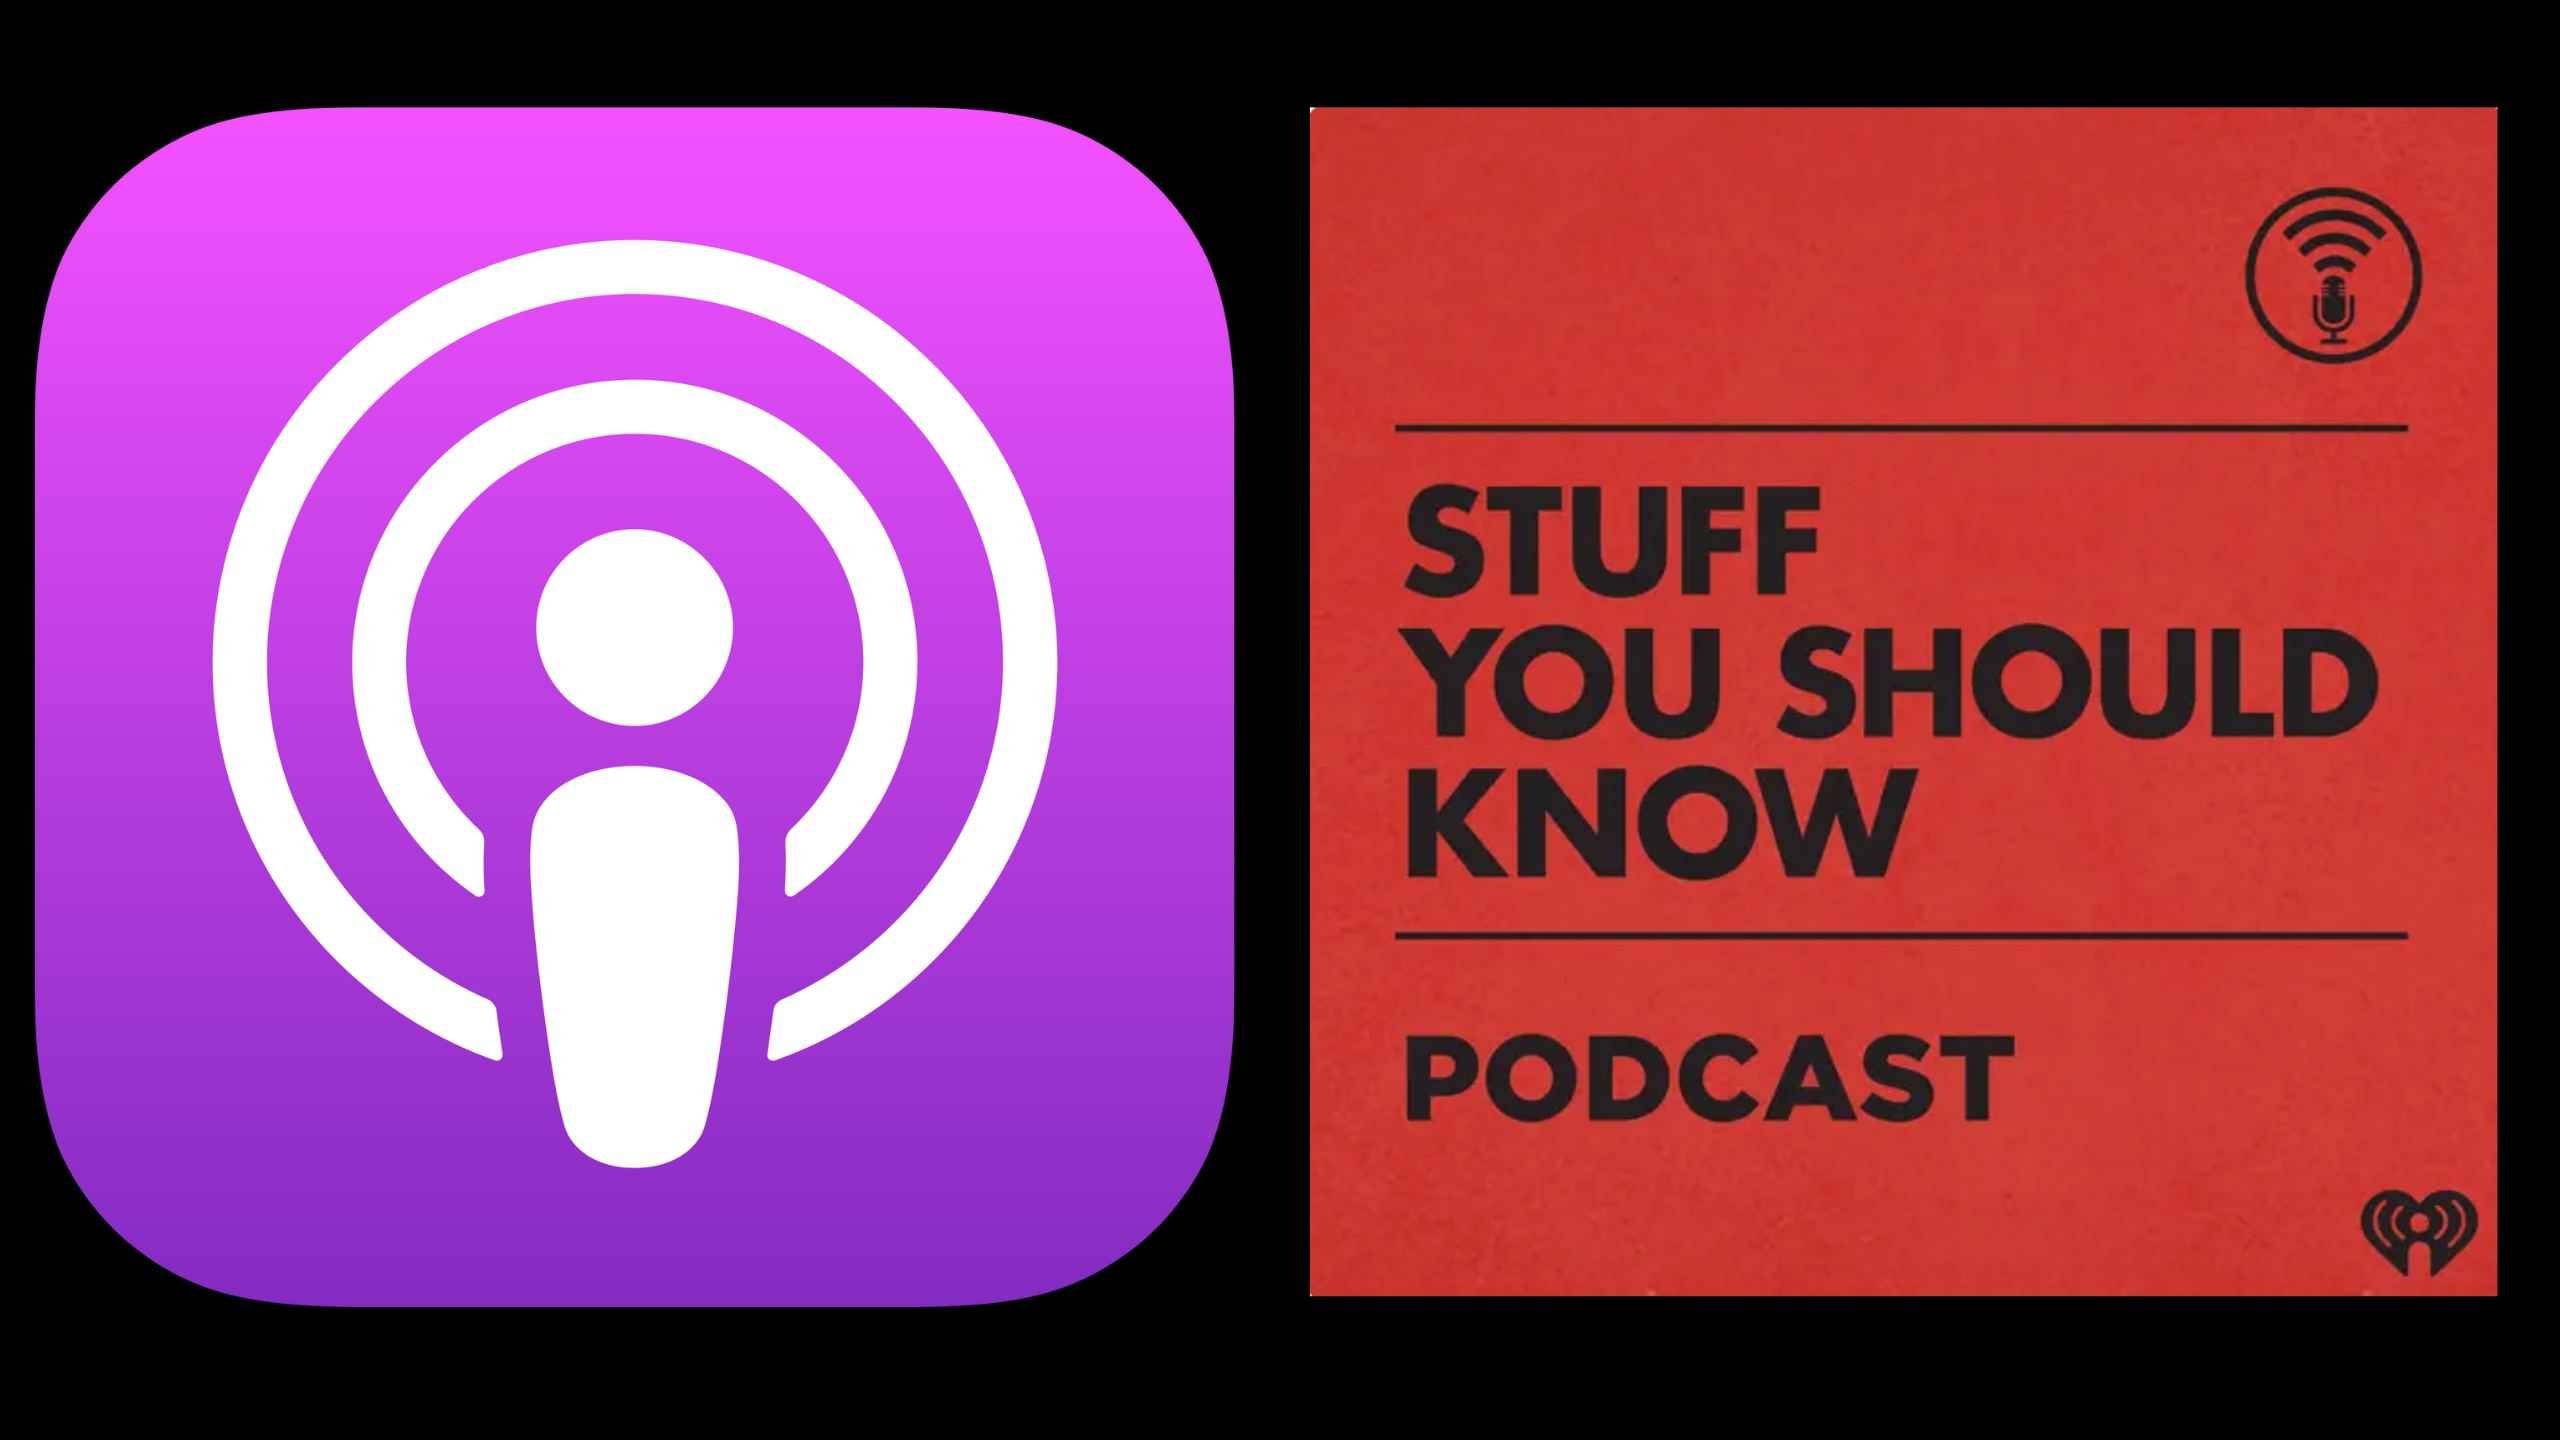 Top 50 Podcasts in America This Week: The Stuff You Should Know